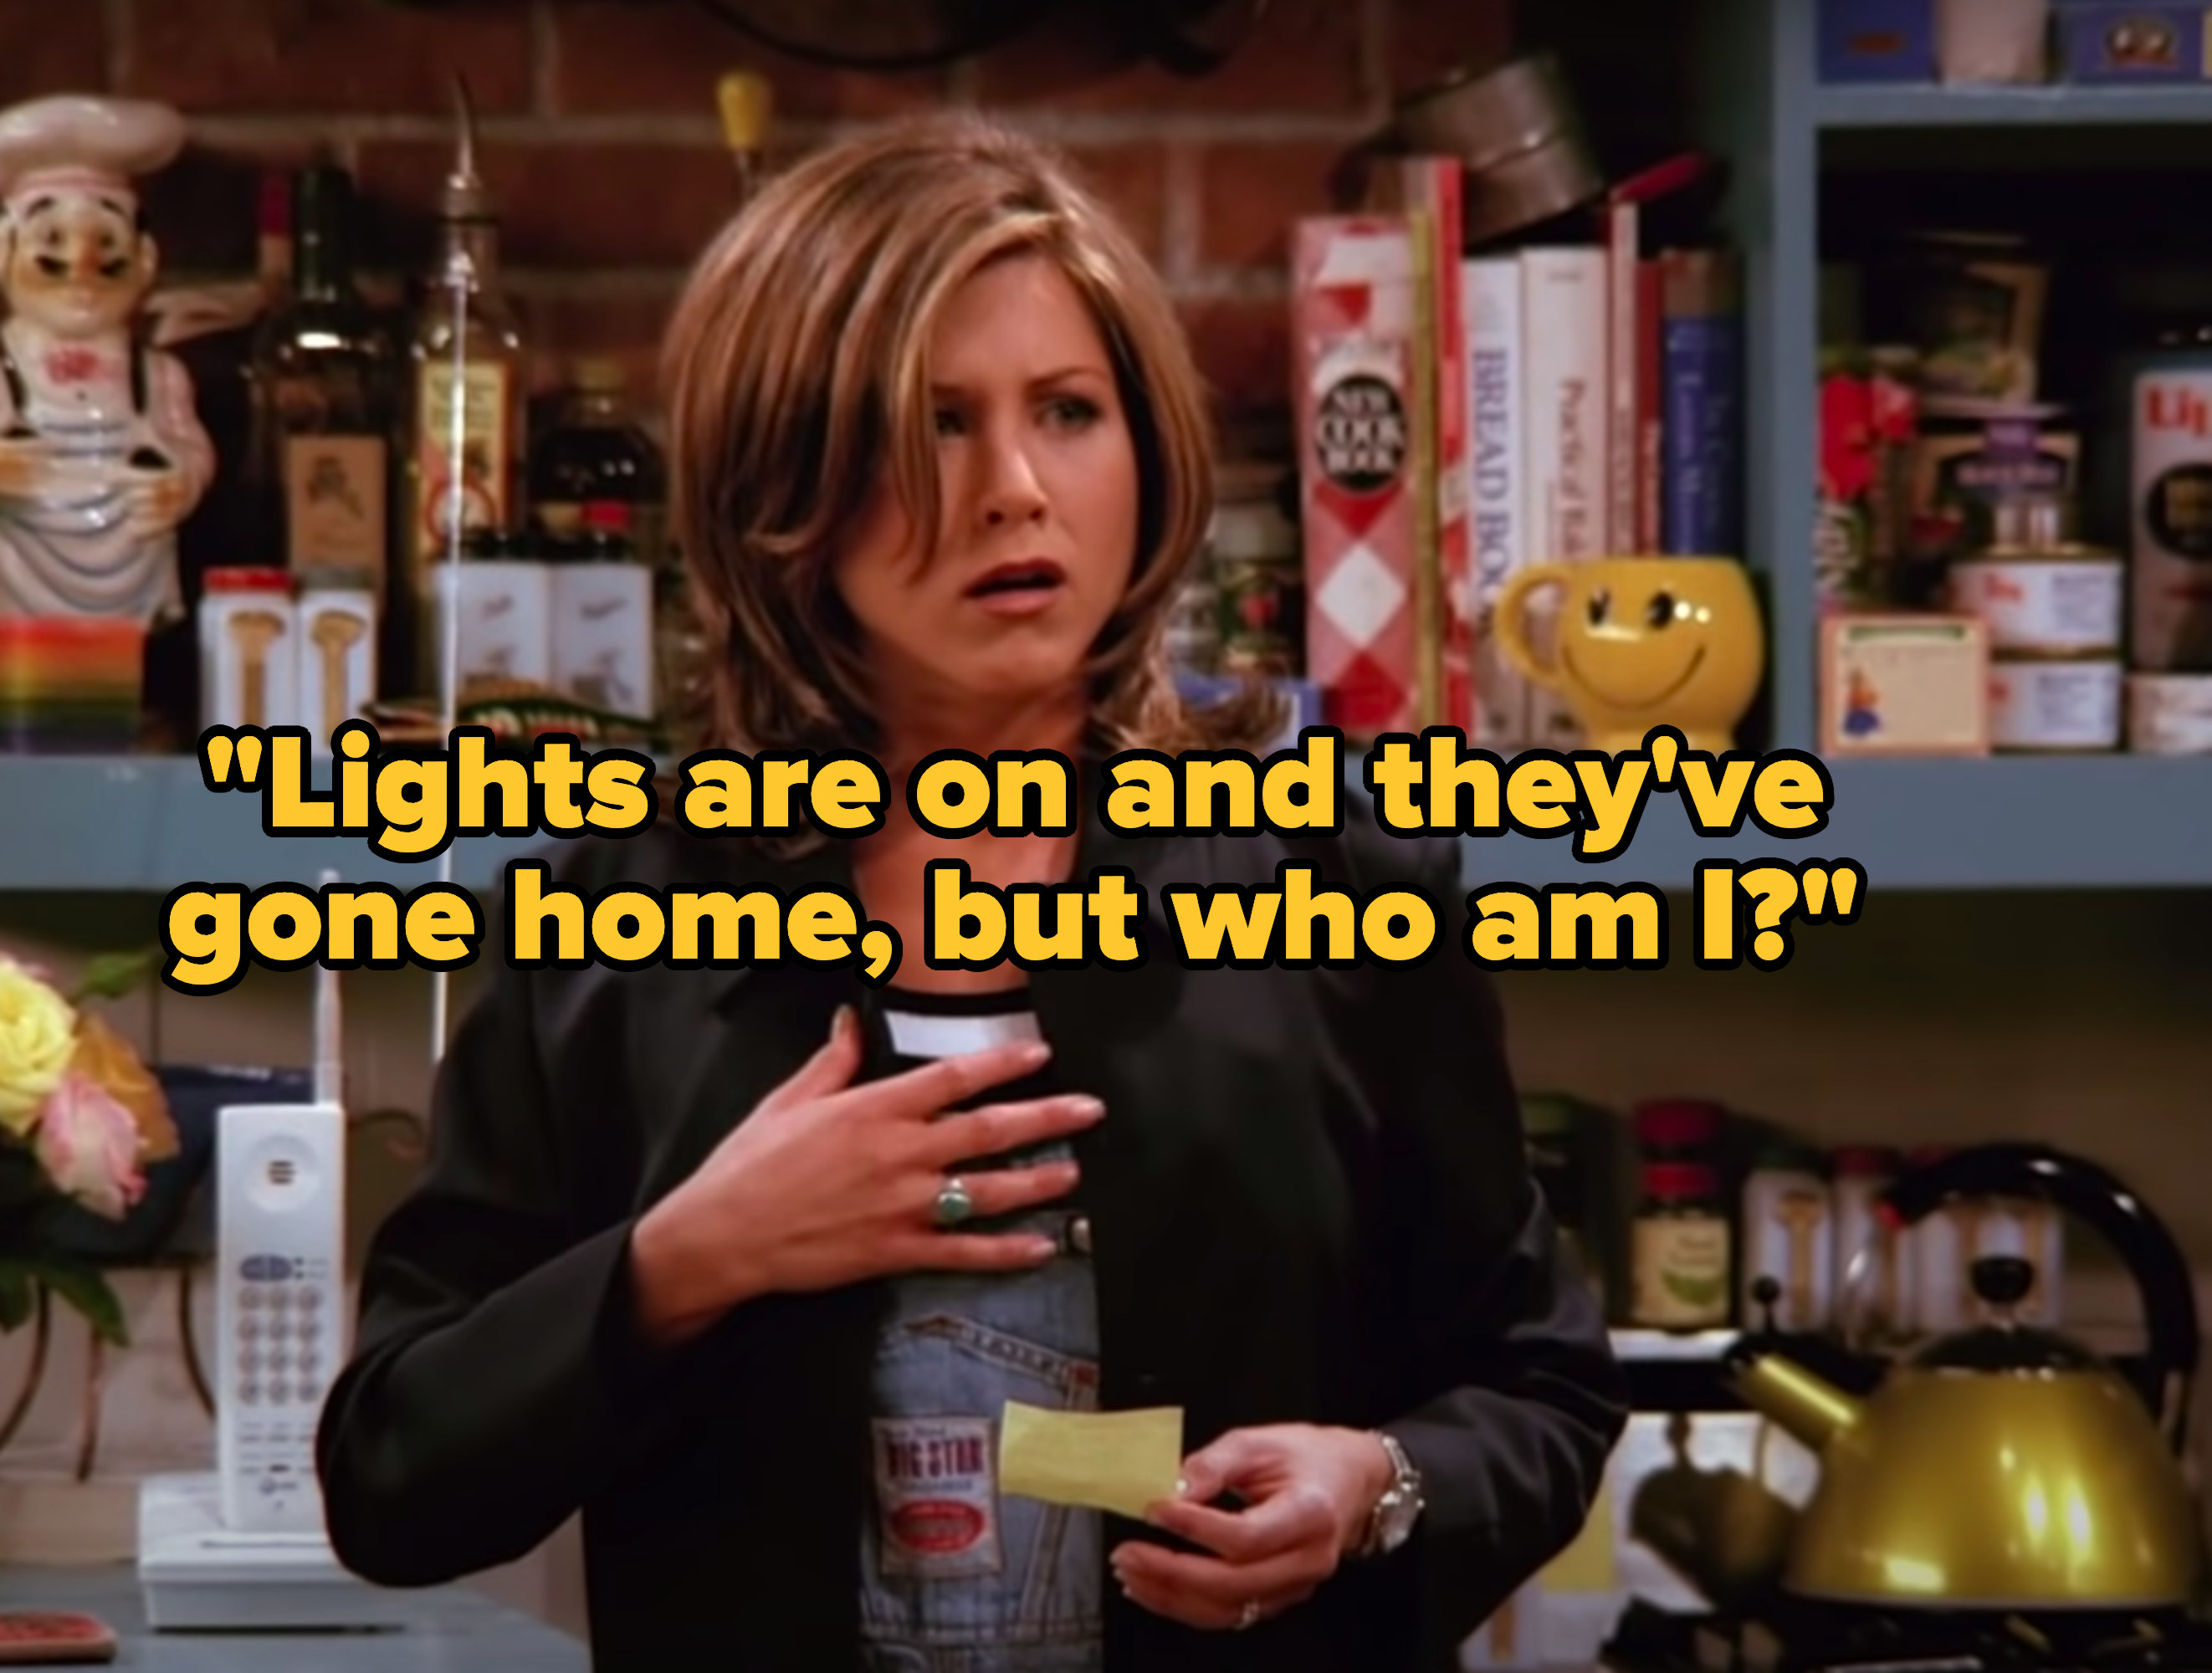 &quot;Lights are on and they&#x27;ve gone home, but who am I&quot; written over Rachel from &quot;Friends&quot; gasping